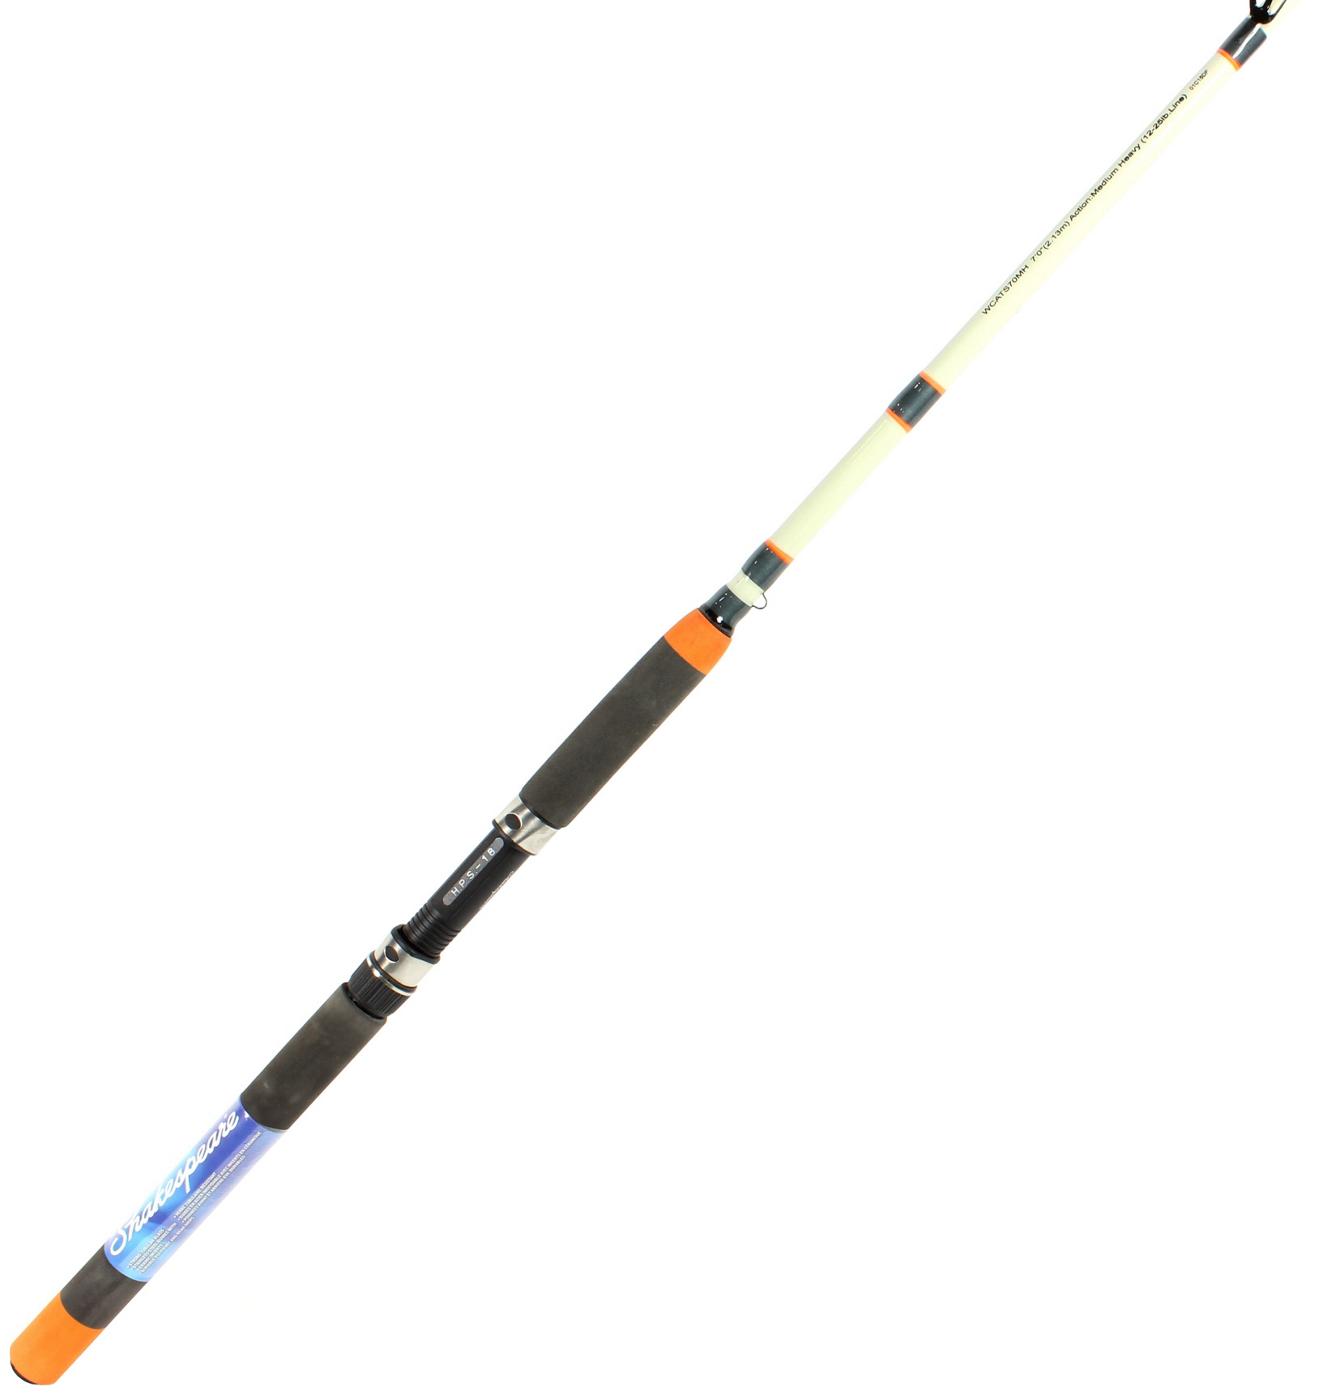 Shakespeare 7' Wild Cat Spinning Rod - Shop Fishing at H-E-B